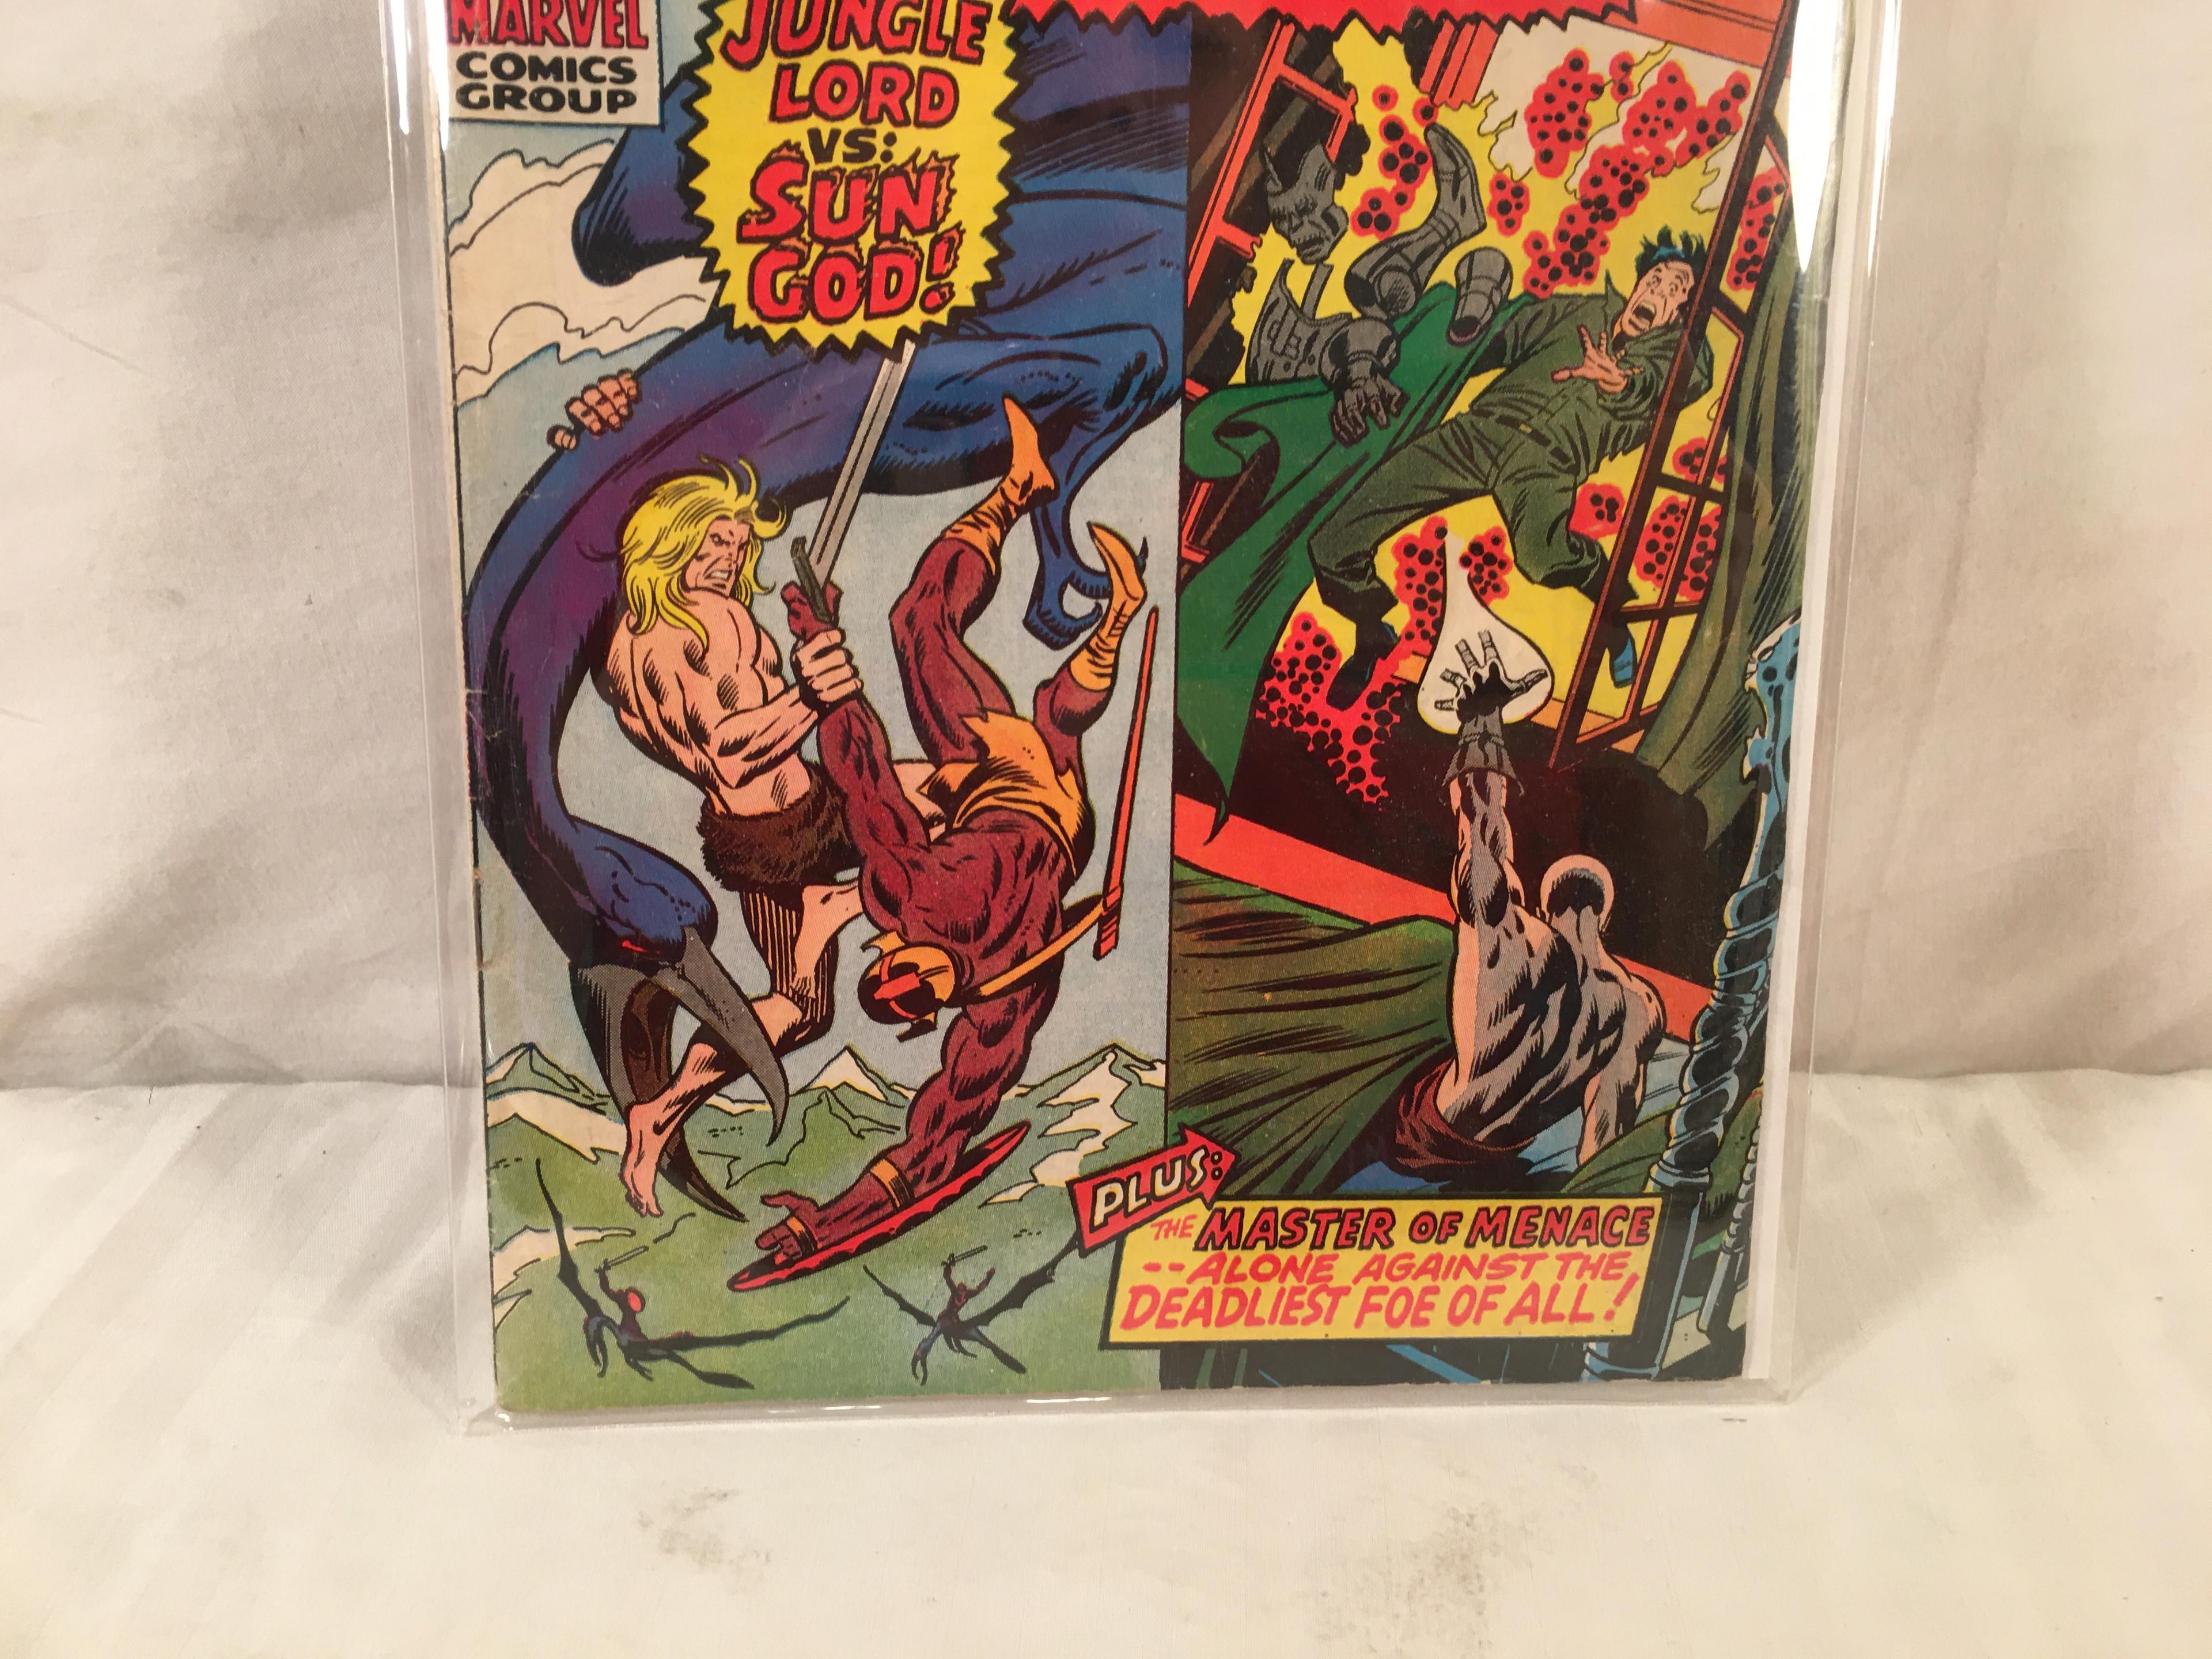 Collector Vintage Marvel Comics Astonishing Tales Featuring Kazar And Dr. Doom Comic No. 4